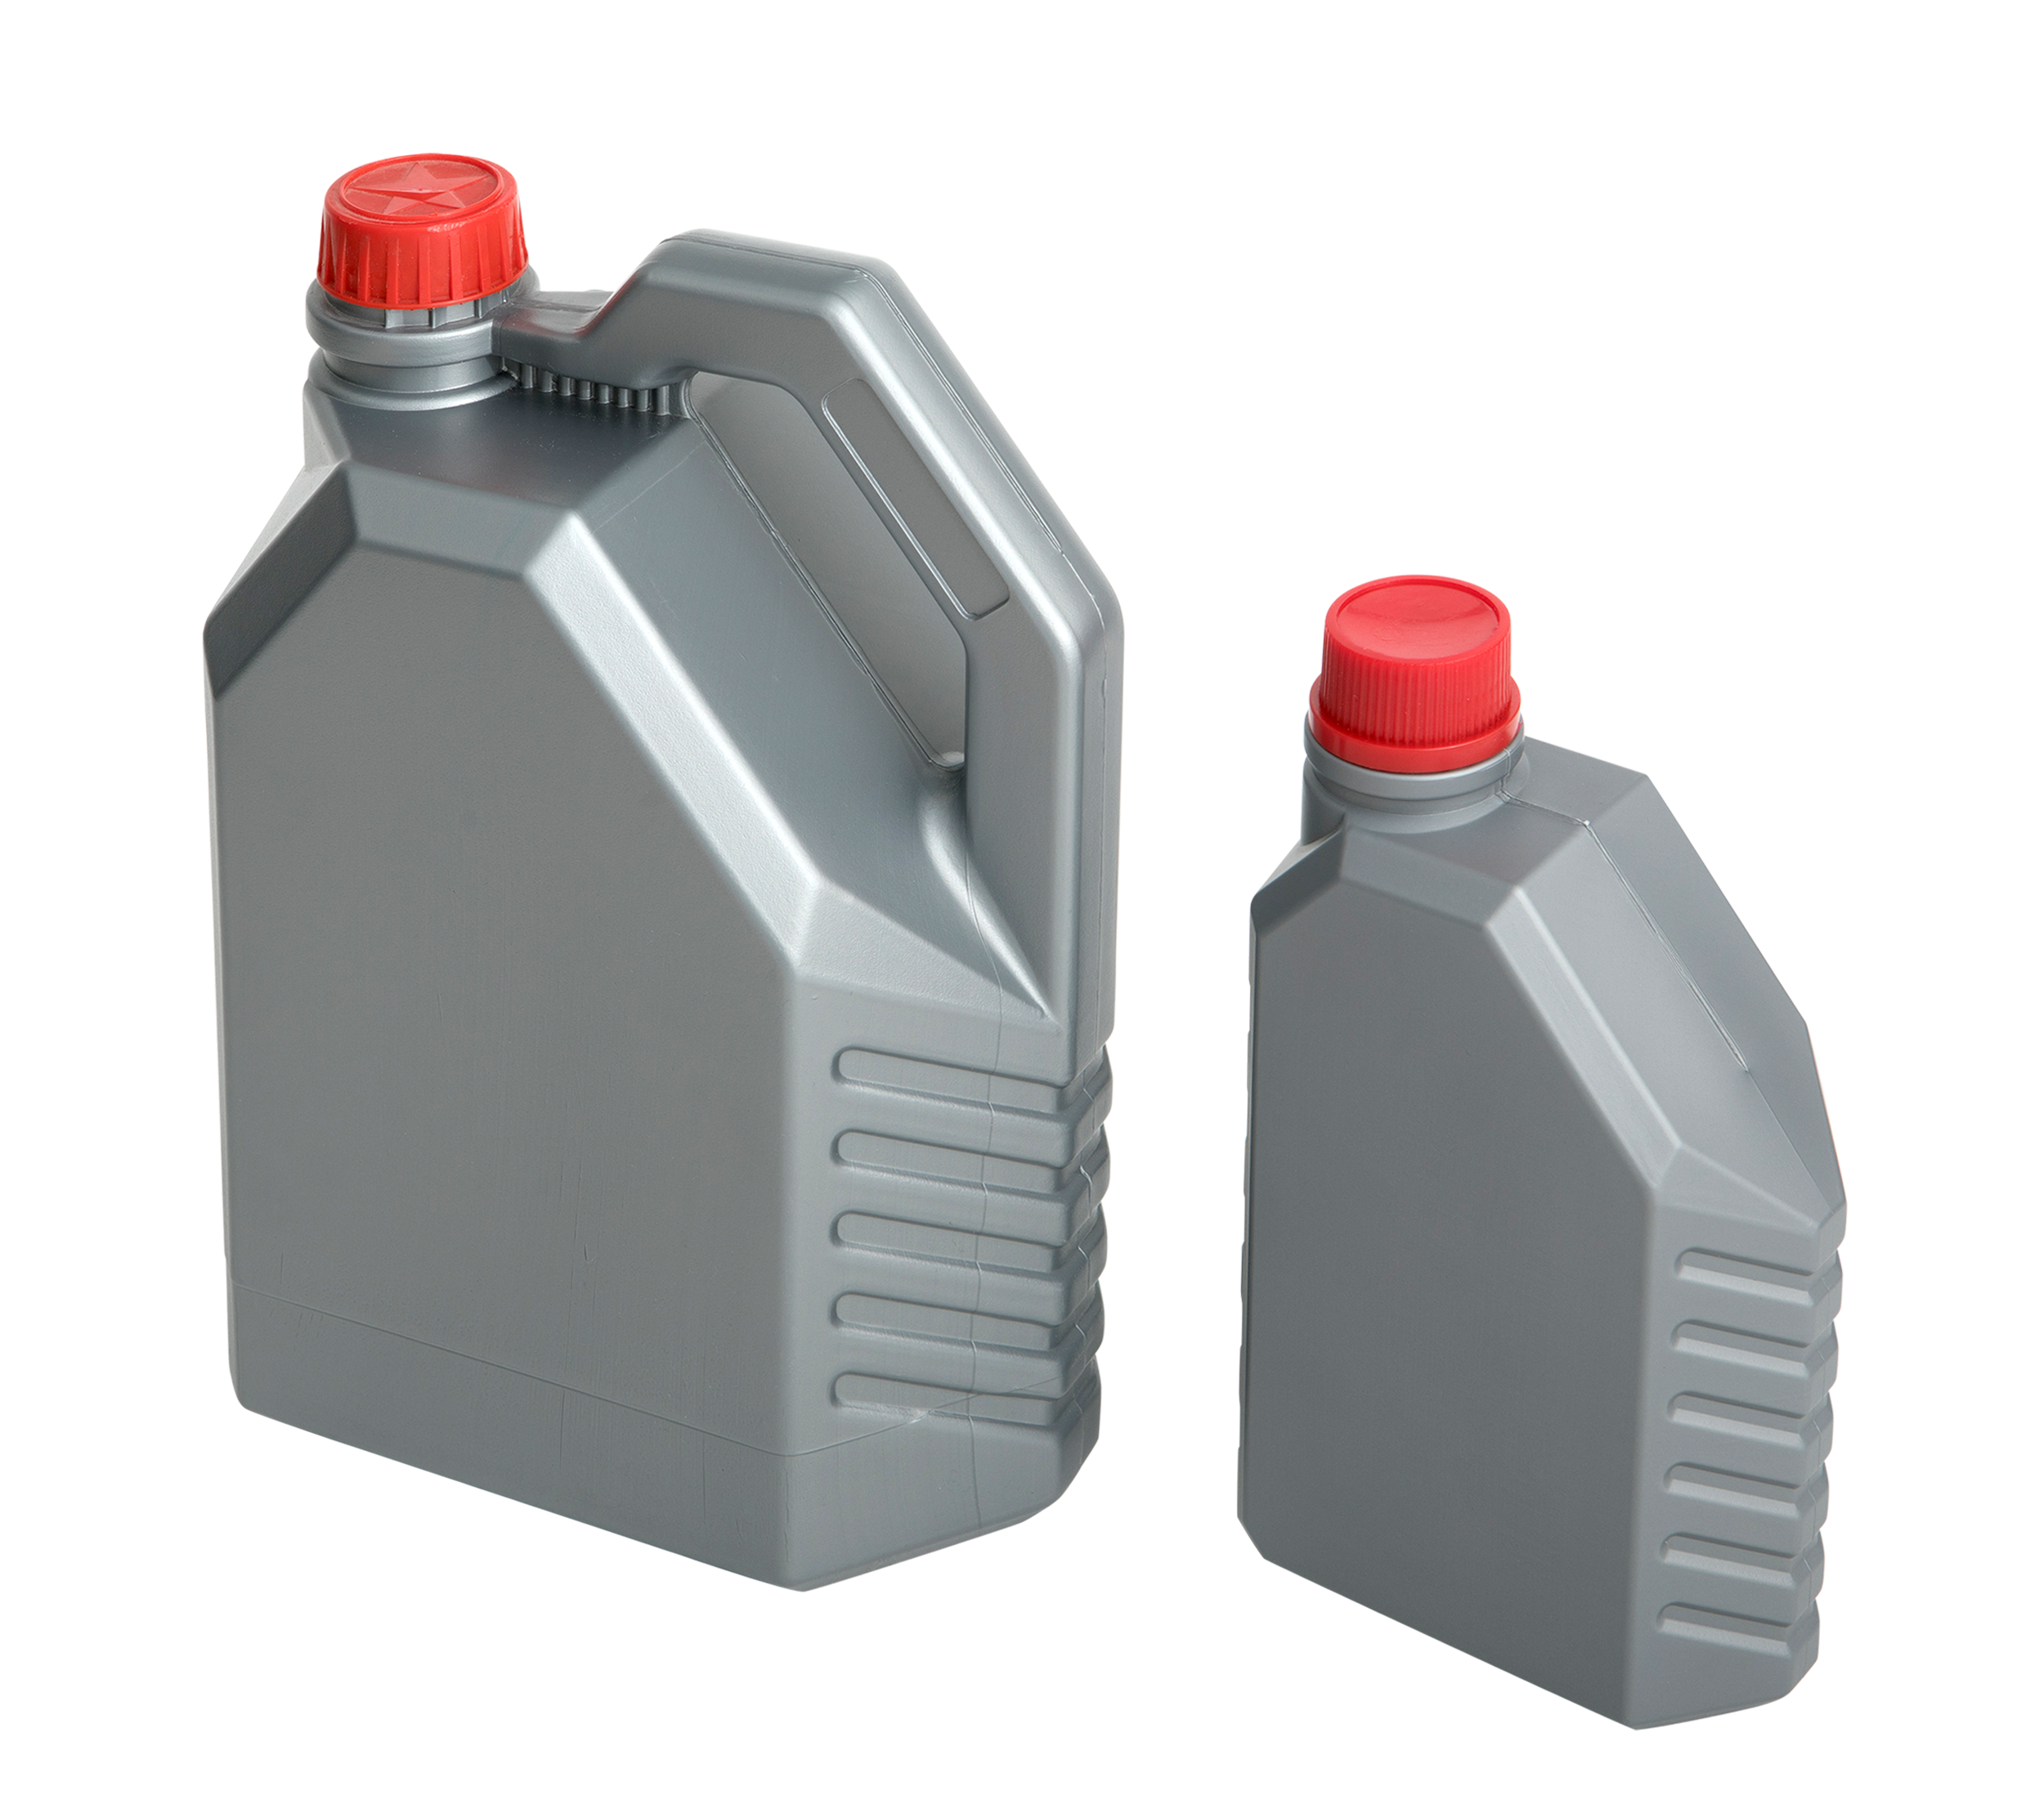 Jerry Cans Manufacturer in Dubai and UAE | Sabin Plastic